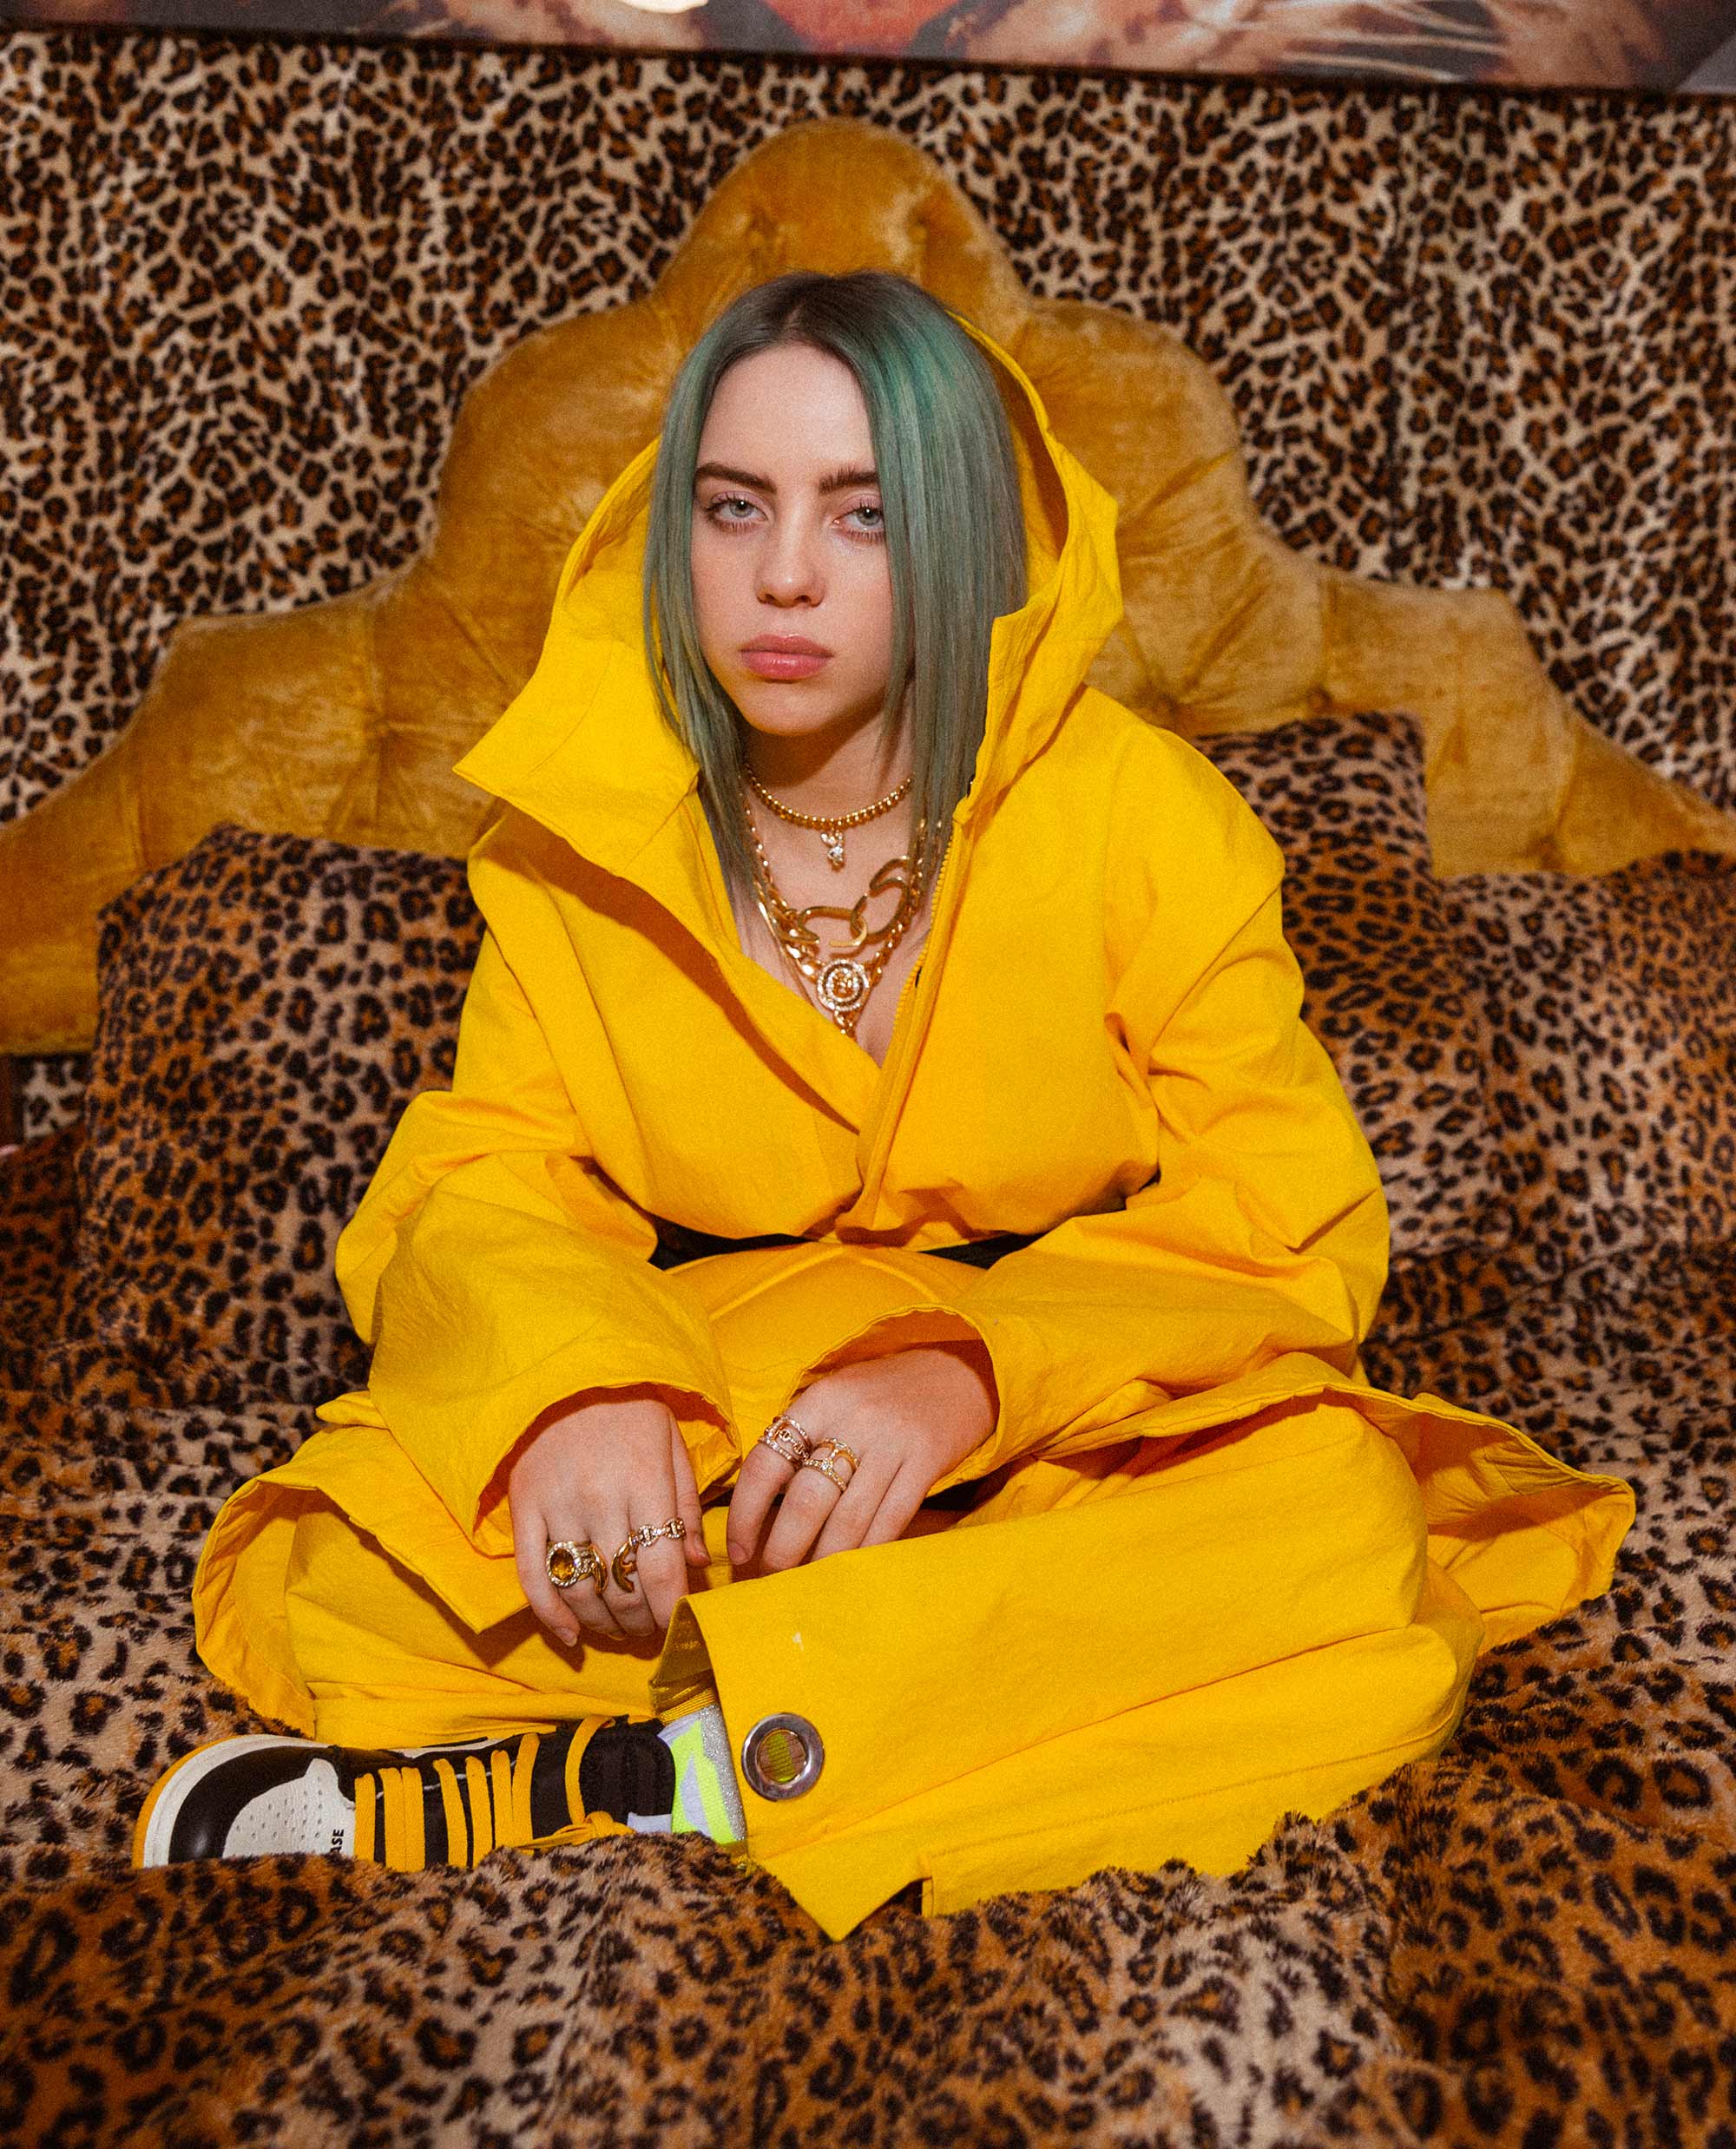 Billie Eilish Interview: The Most Talked About Teen On